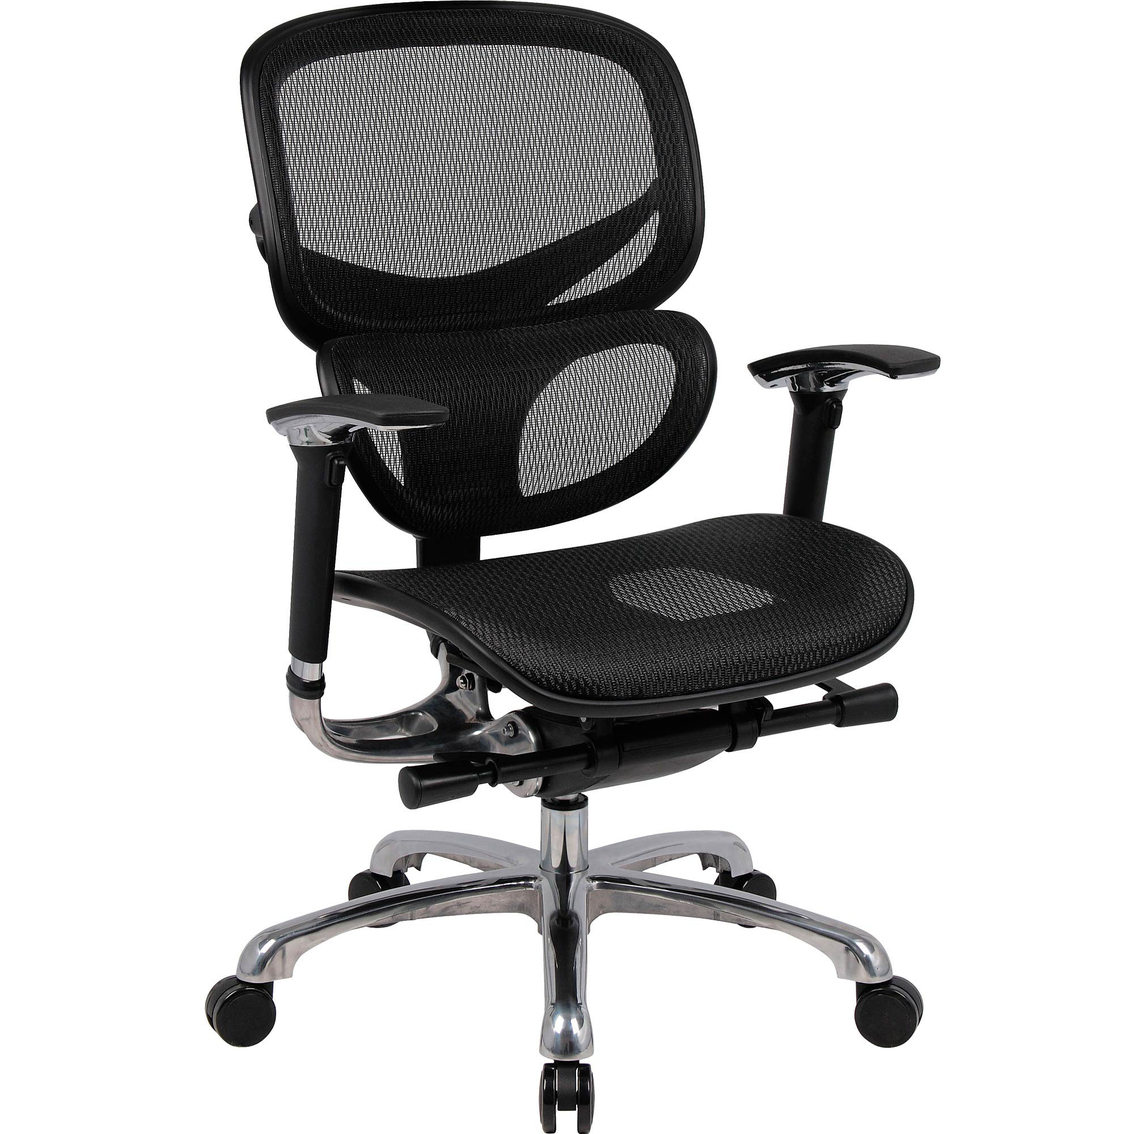 Presidential Seating Executive Oversized Mesh Task Chair Office